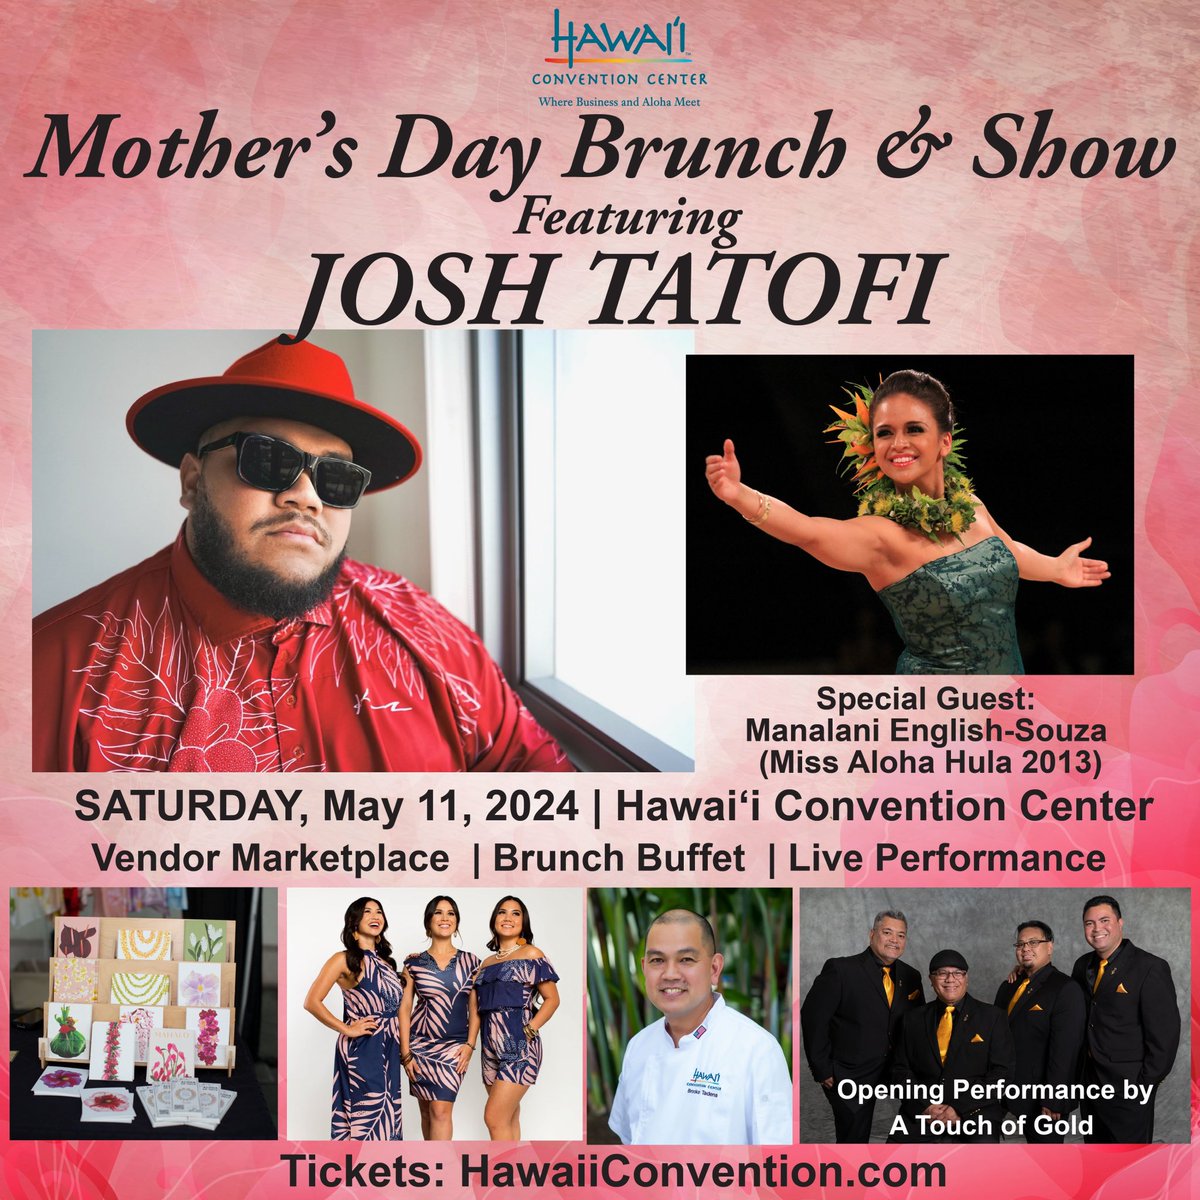 We are excited to welcome A Touch of Gold to our Mother's Day Show! Enjoy a delicious brunch while being serenaded by one of Hawaii's most unique musical groups. Brunch will be followed by a performance by, Josh Tatofi! Tickets: HawaiiConvention.com